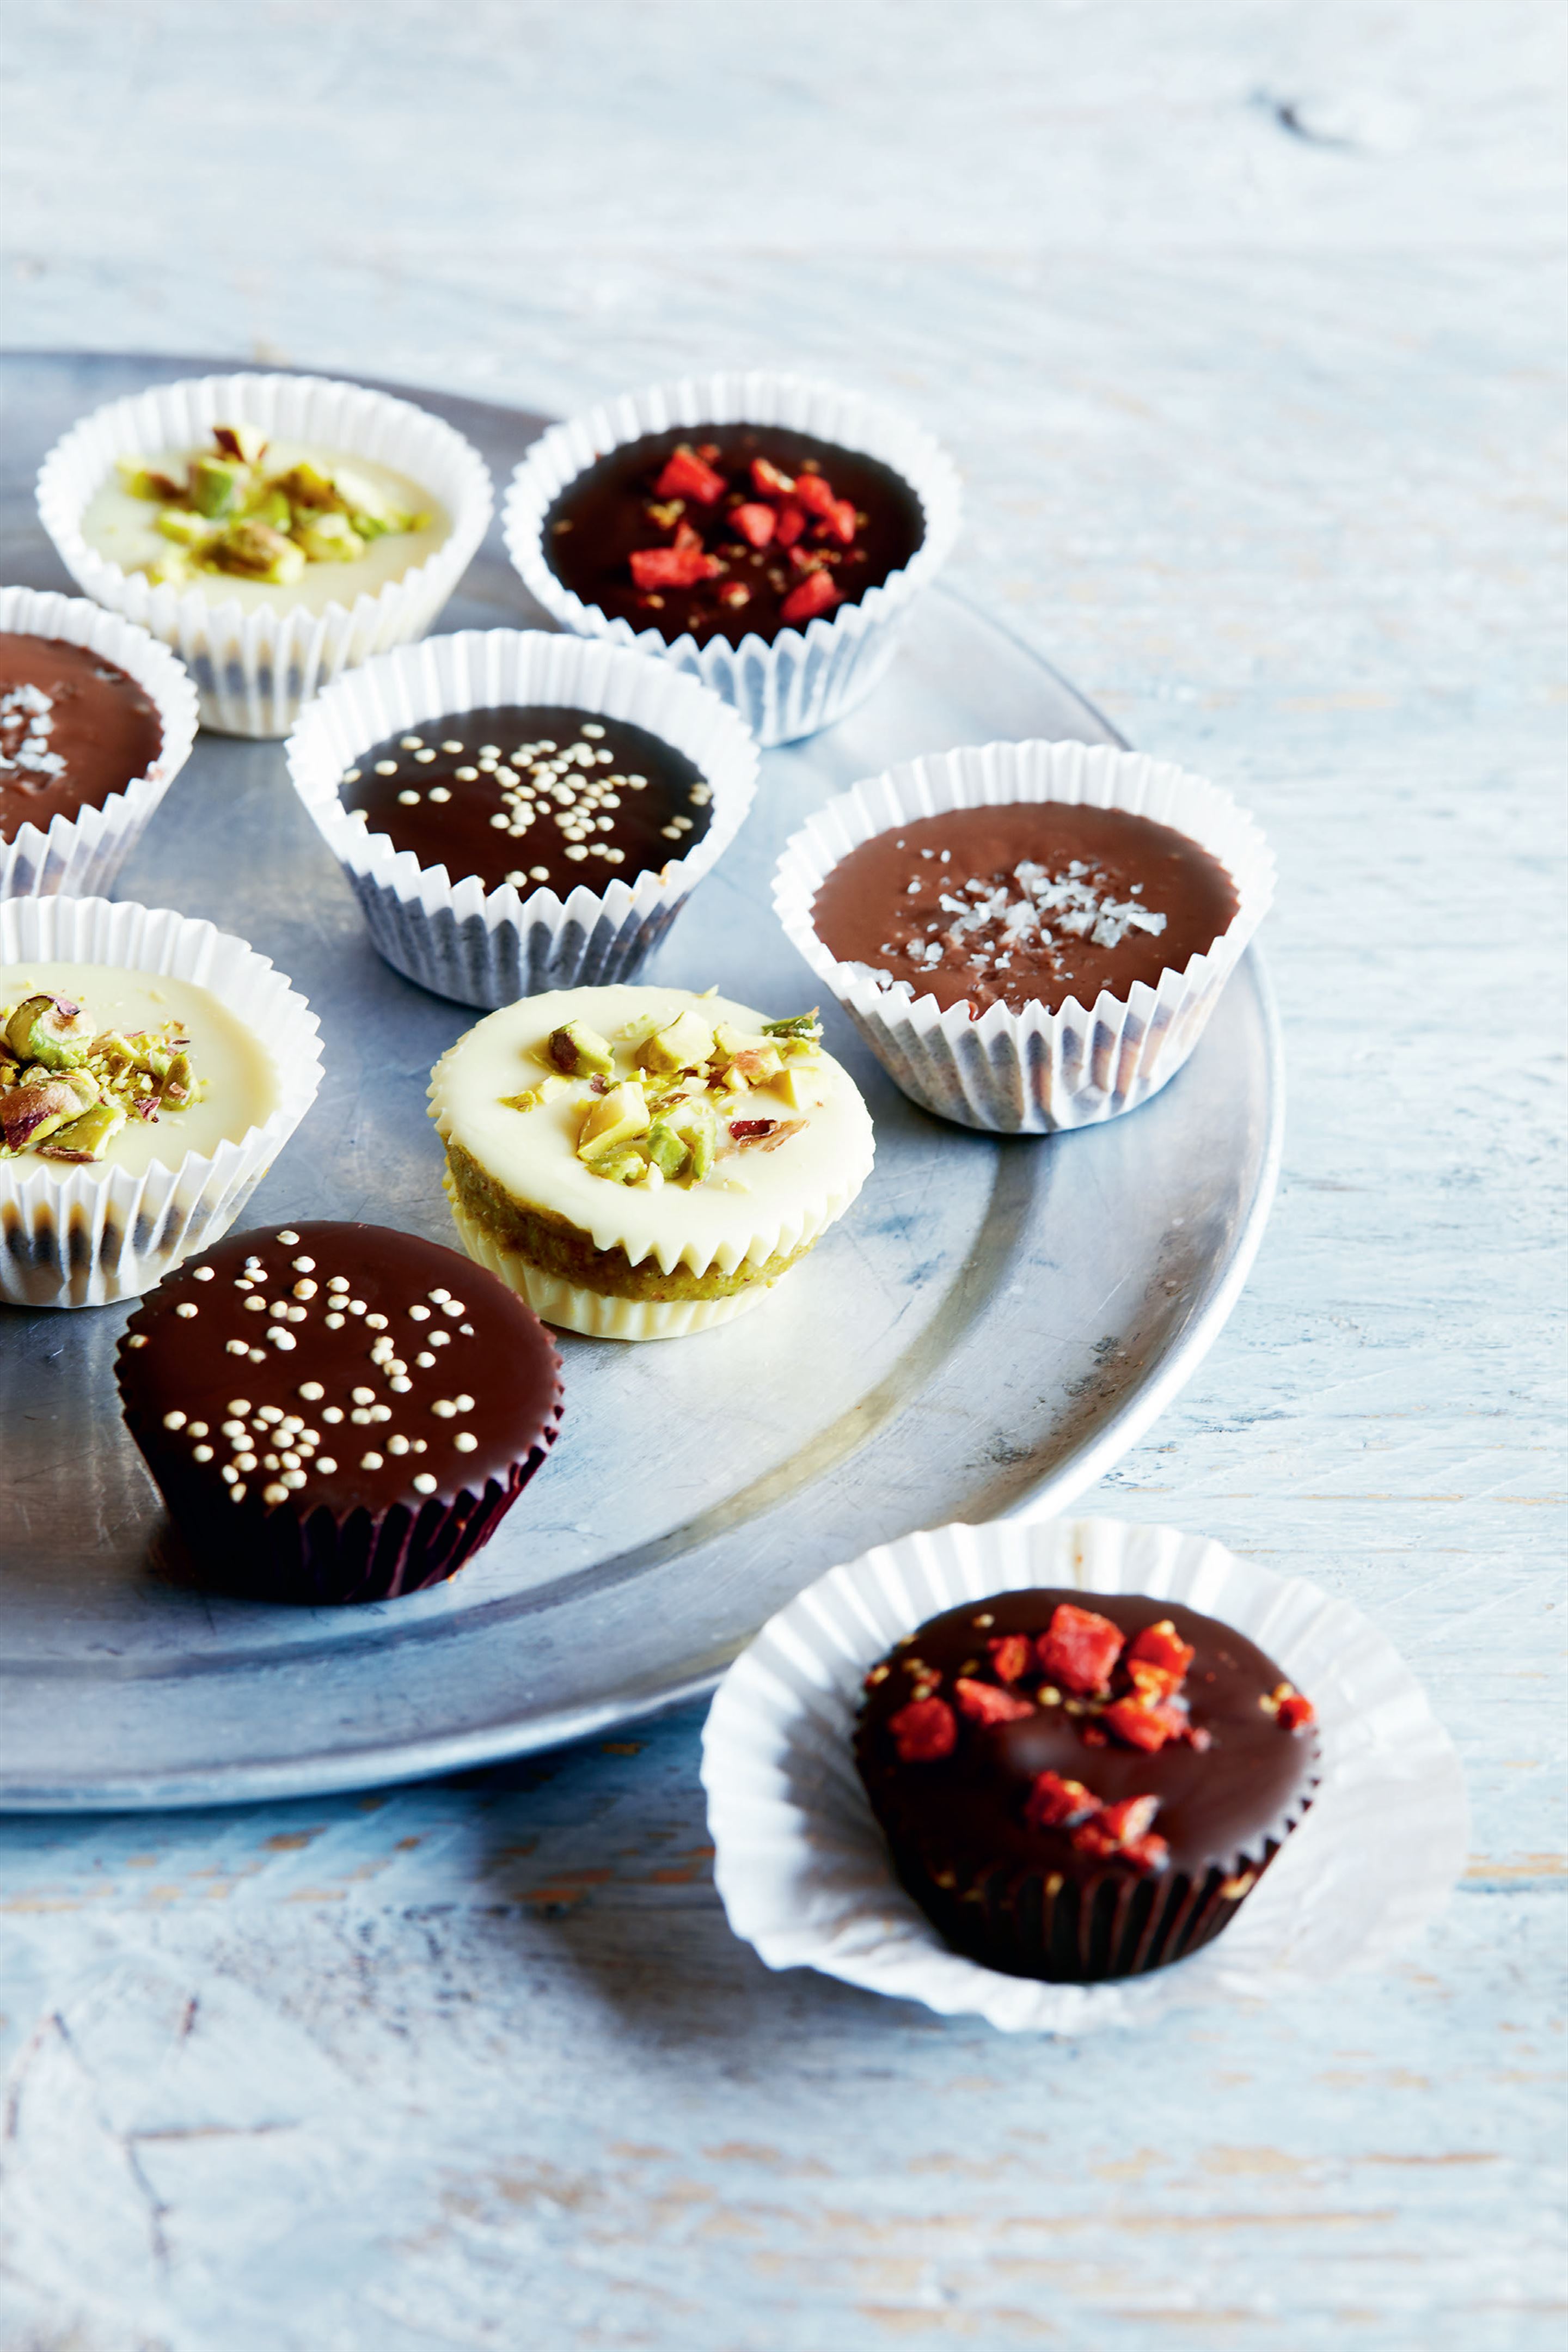 White chocolate pistachio nut butter cups